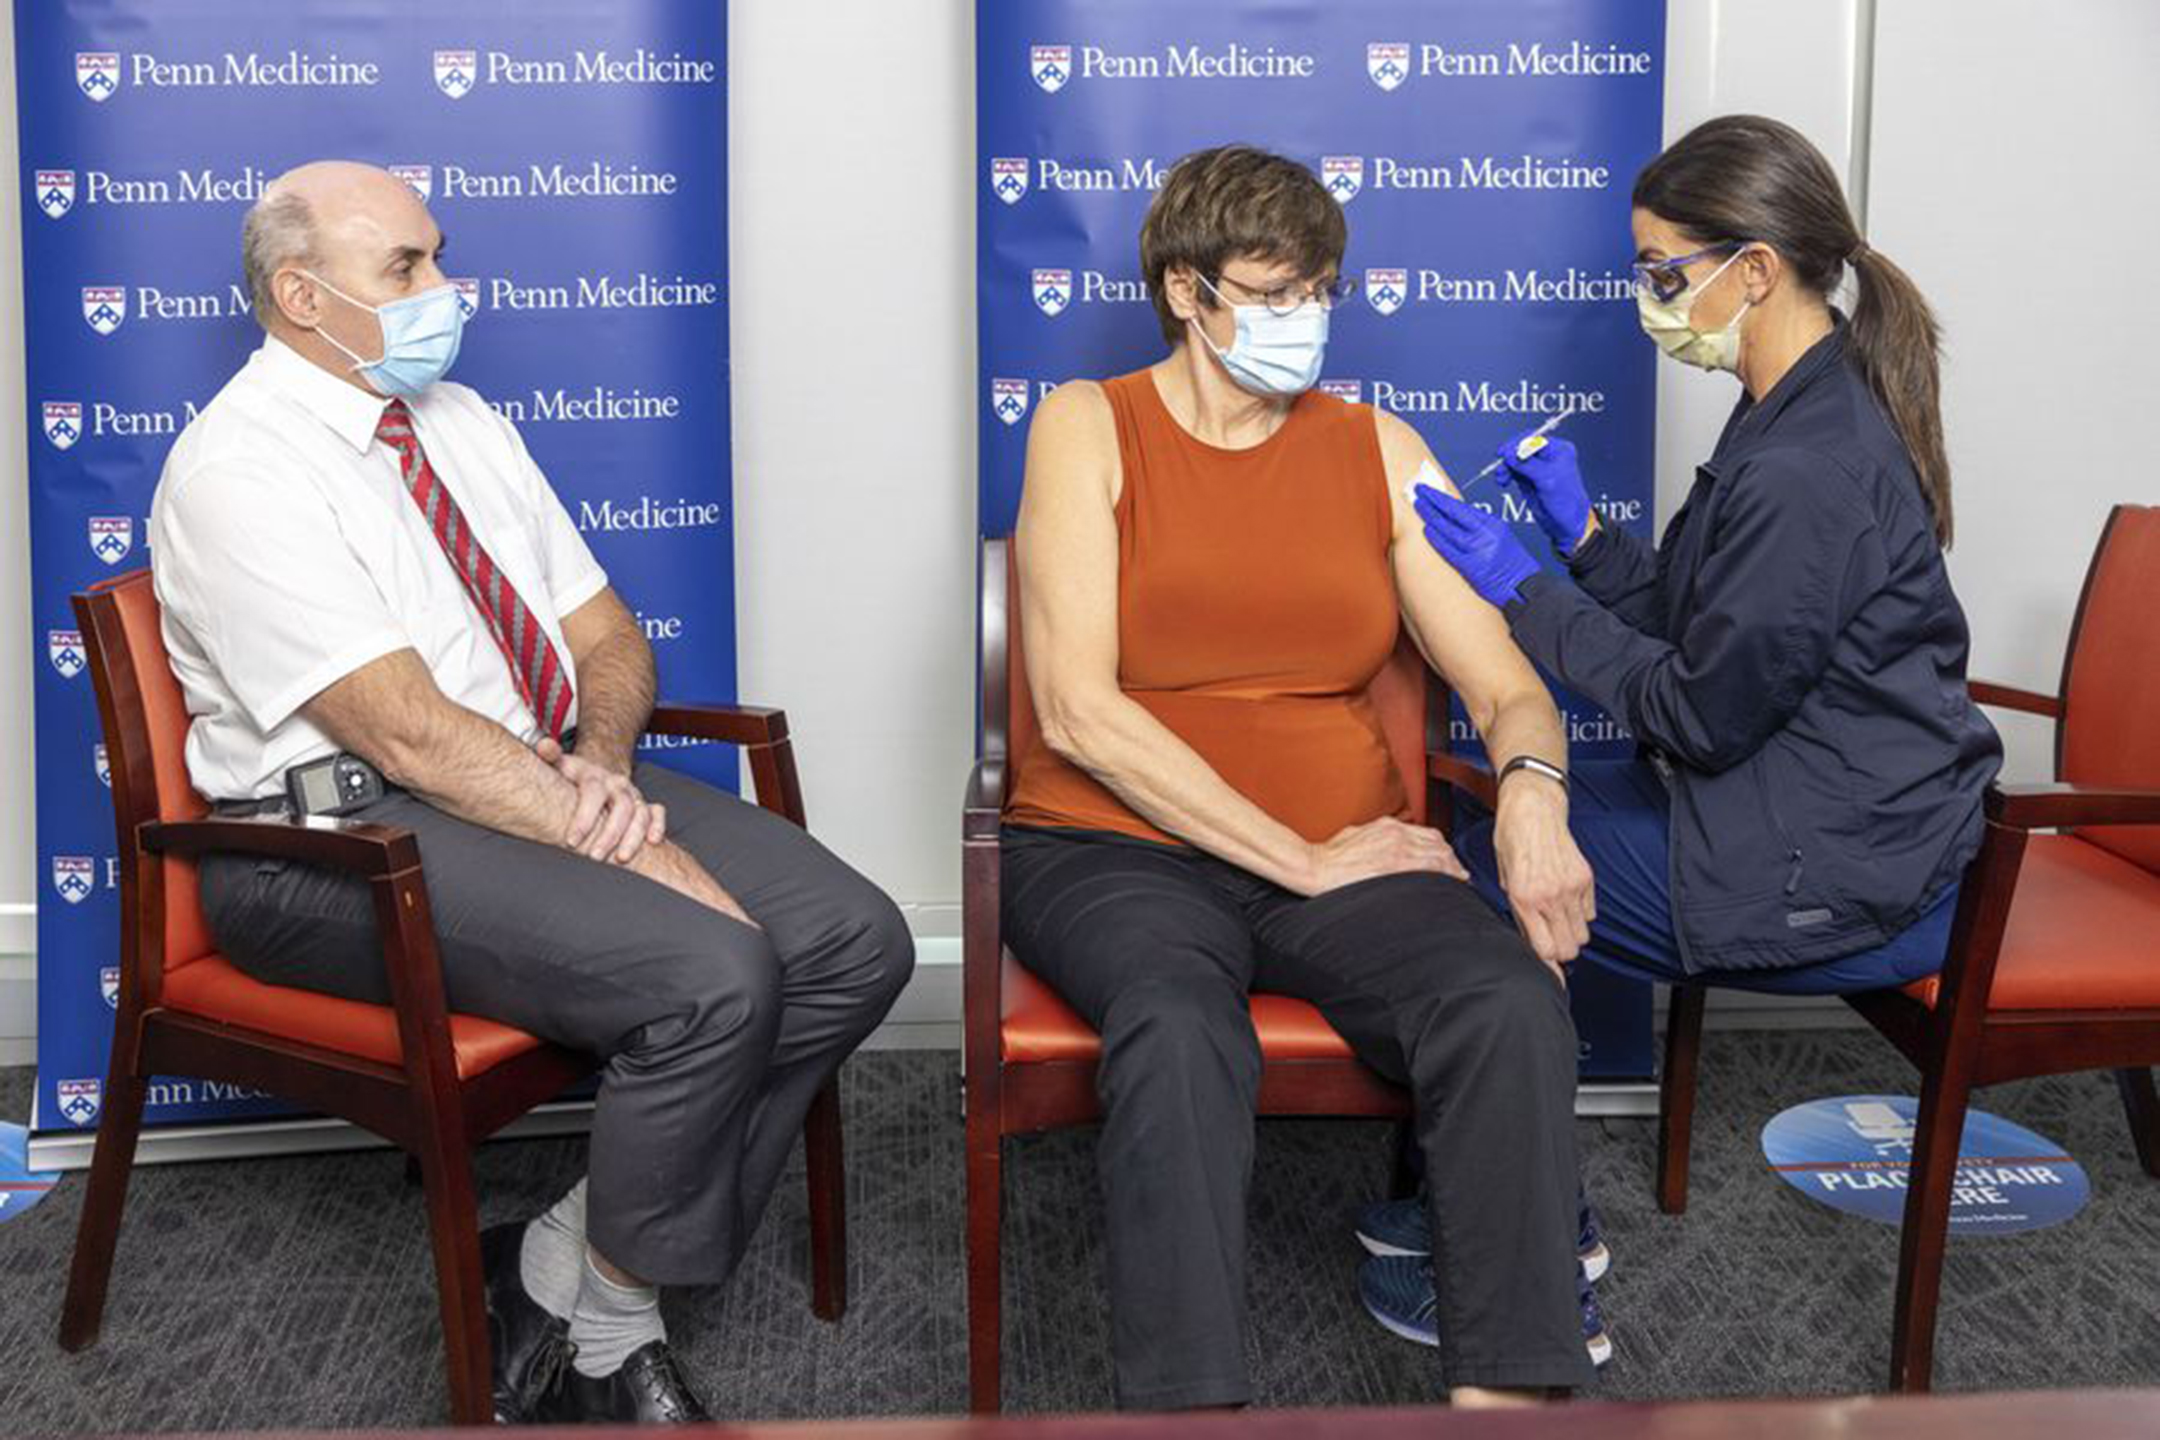 Three people sitting, all wearing masks. A man on the left, a woman in the middle getting a shot, and a nurse of the right administering the shot.